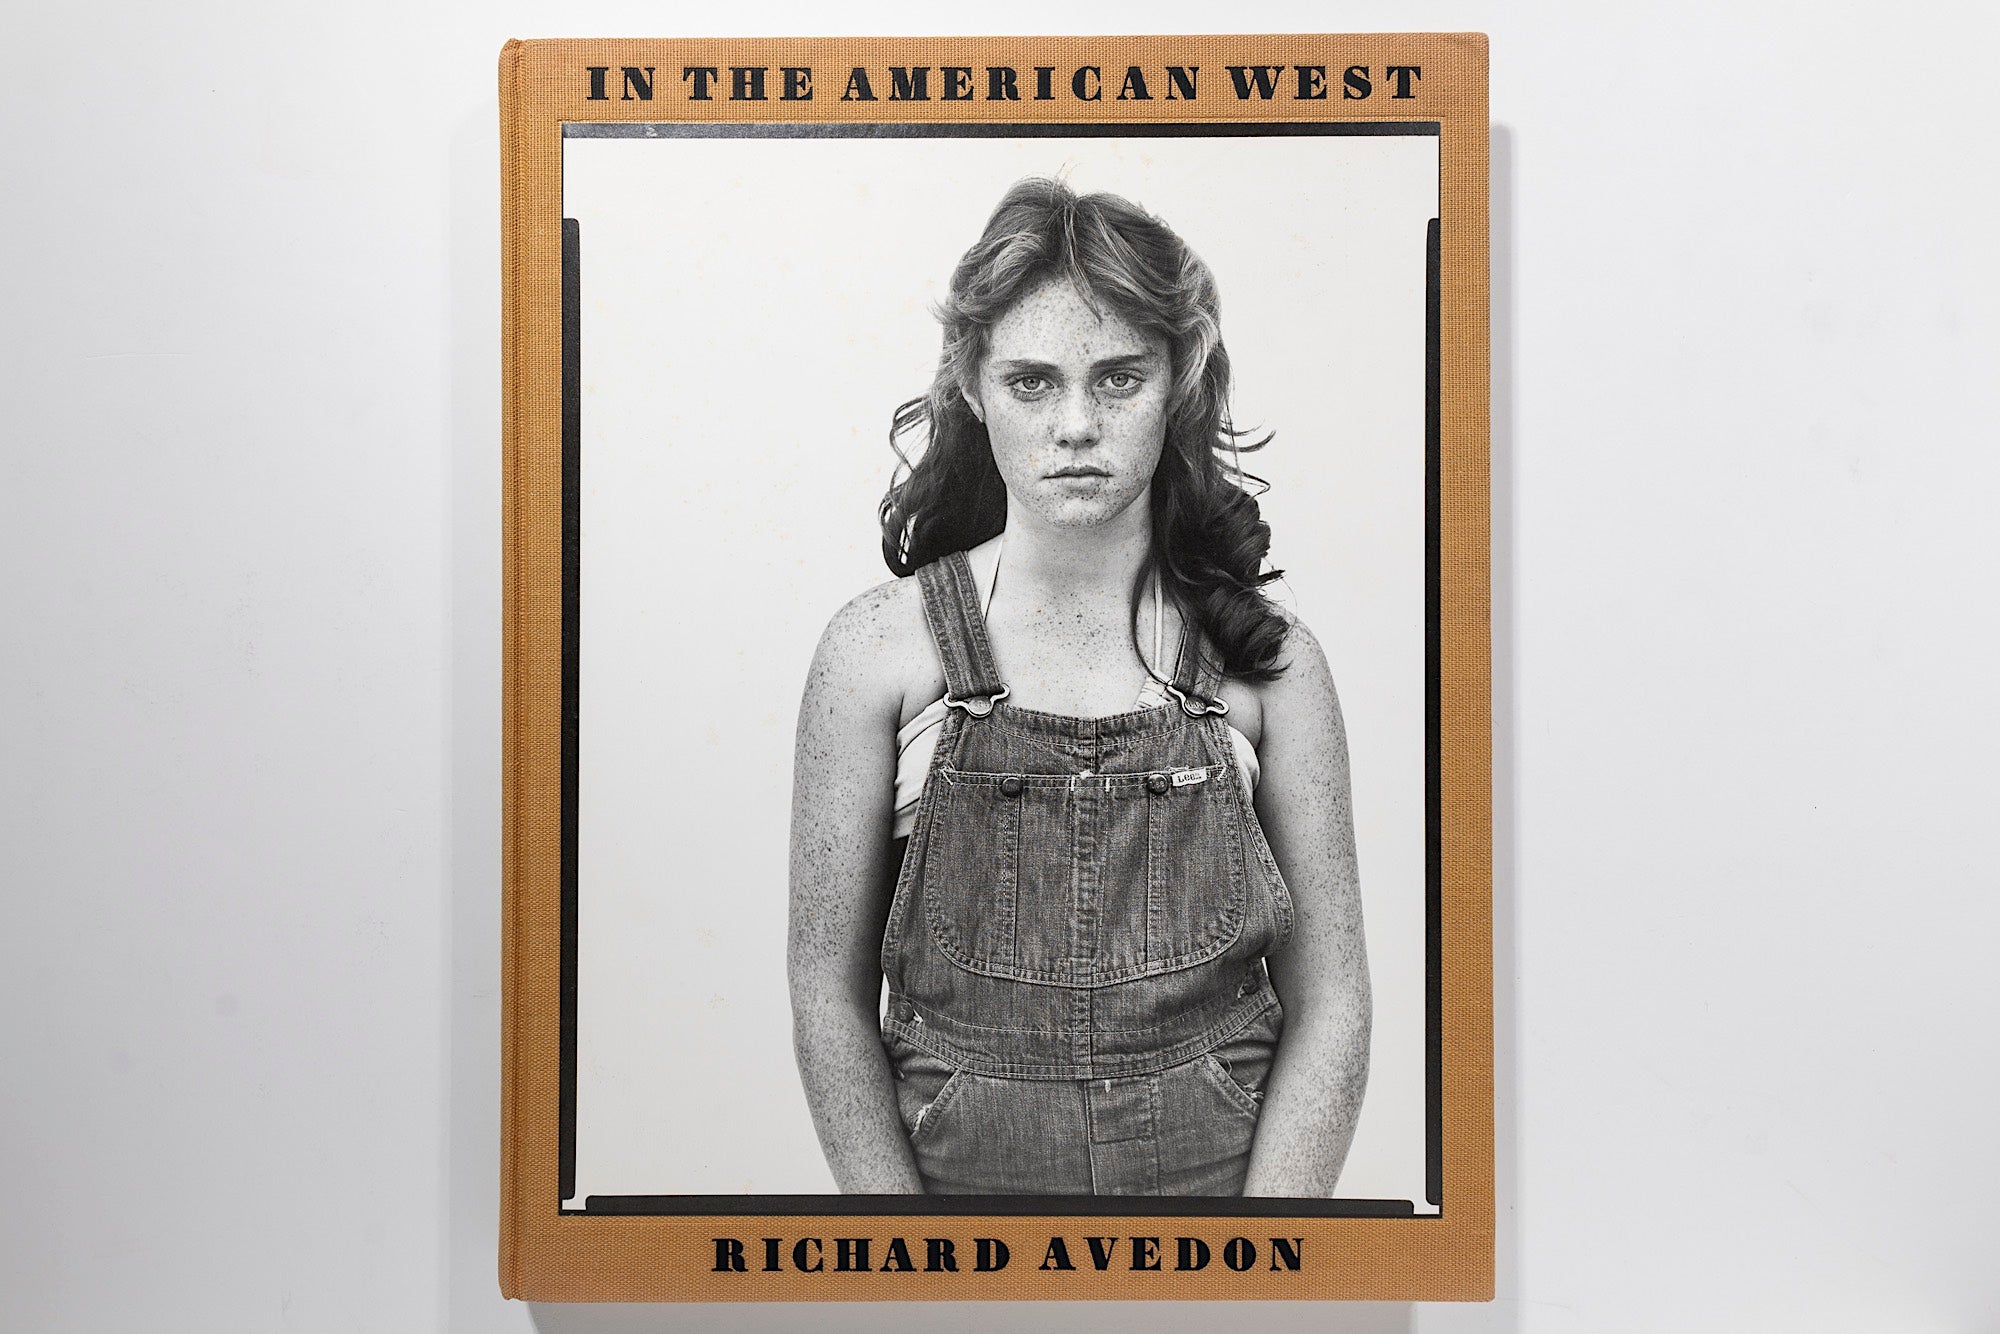 Richard Avedon - In the American West